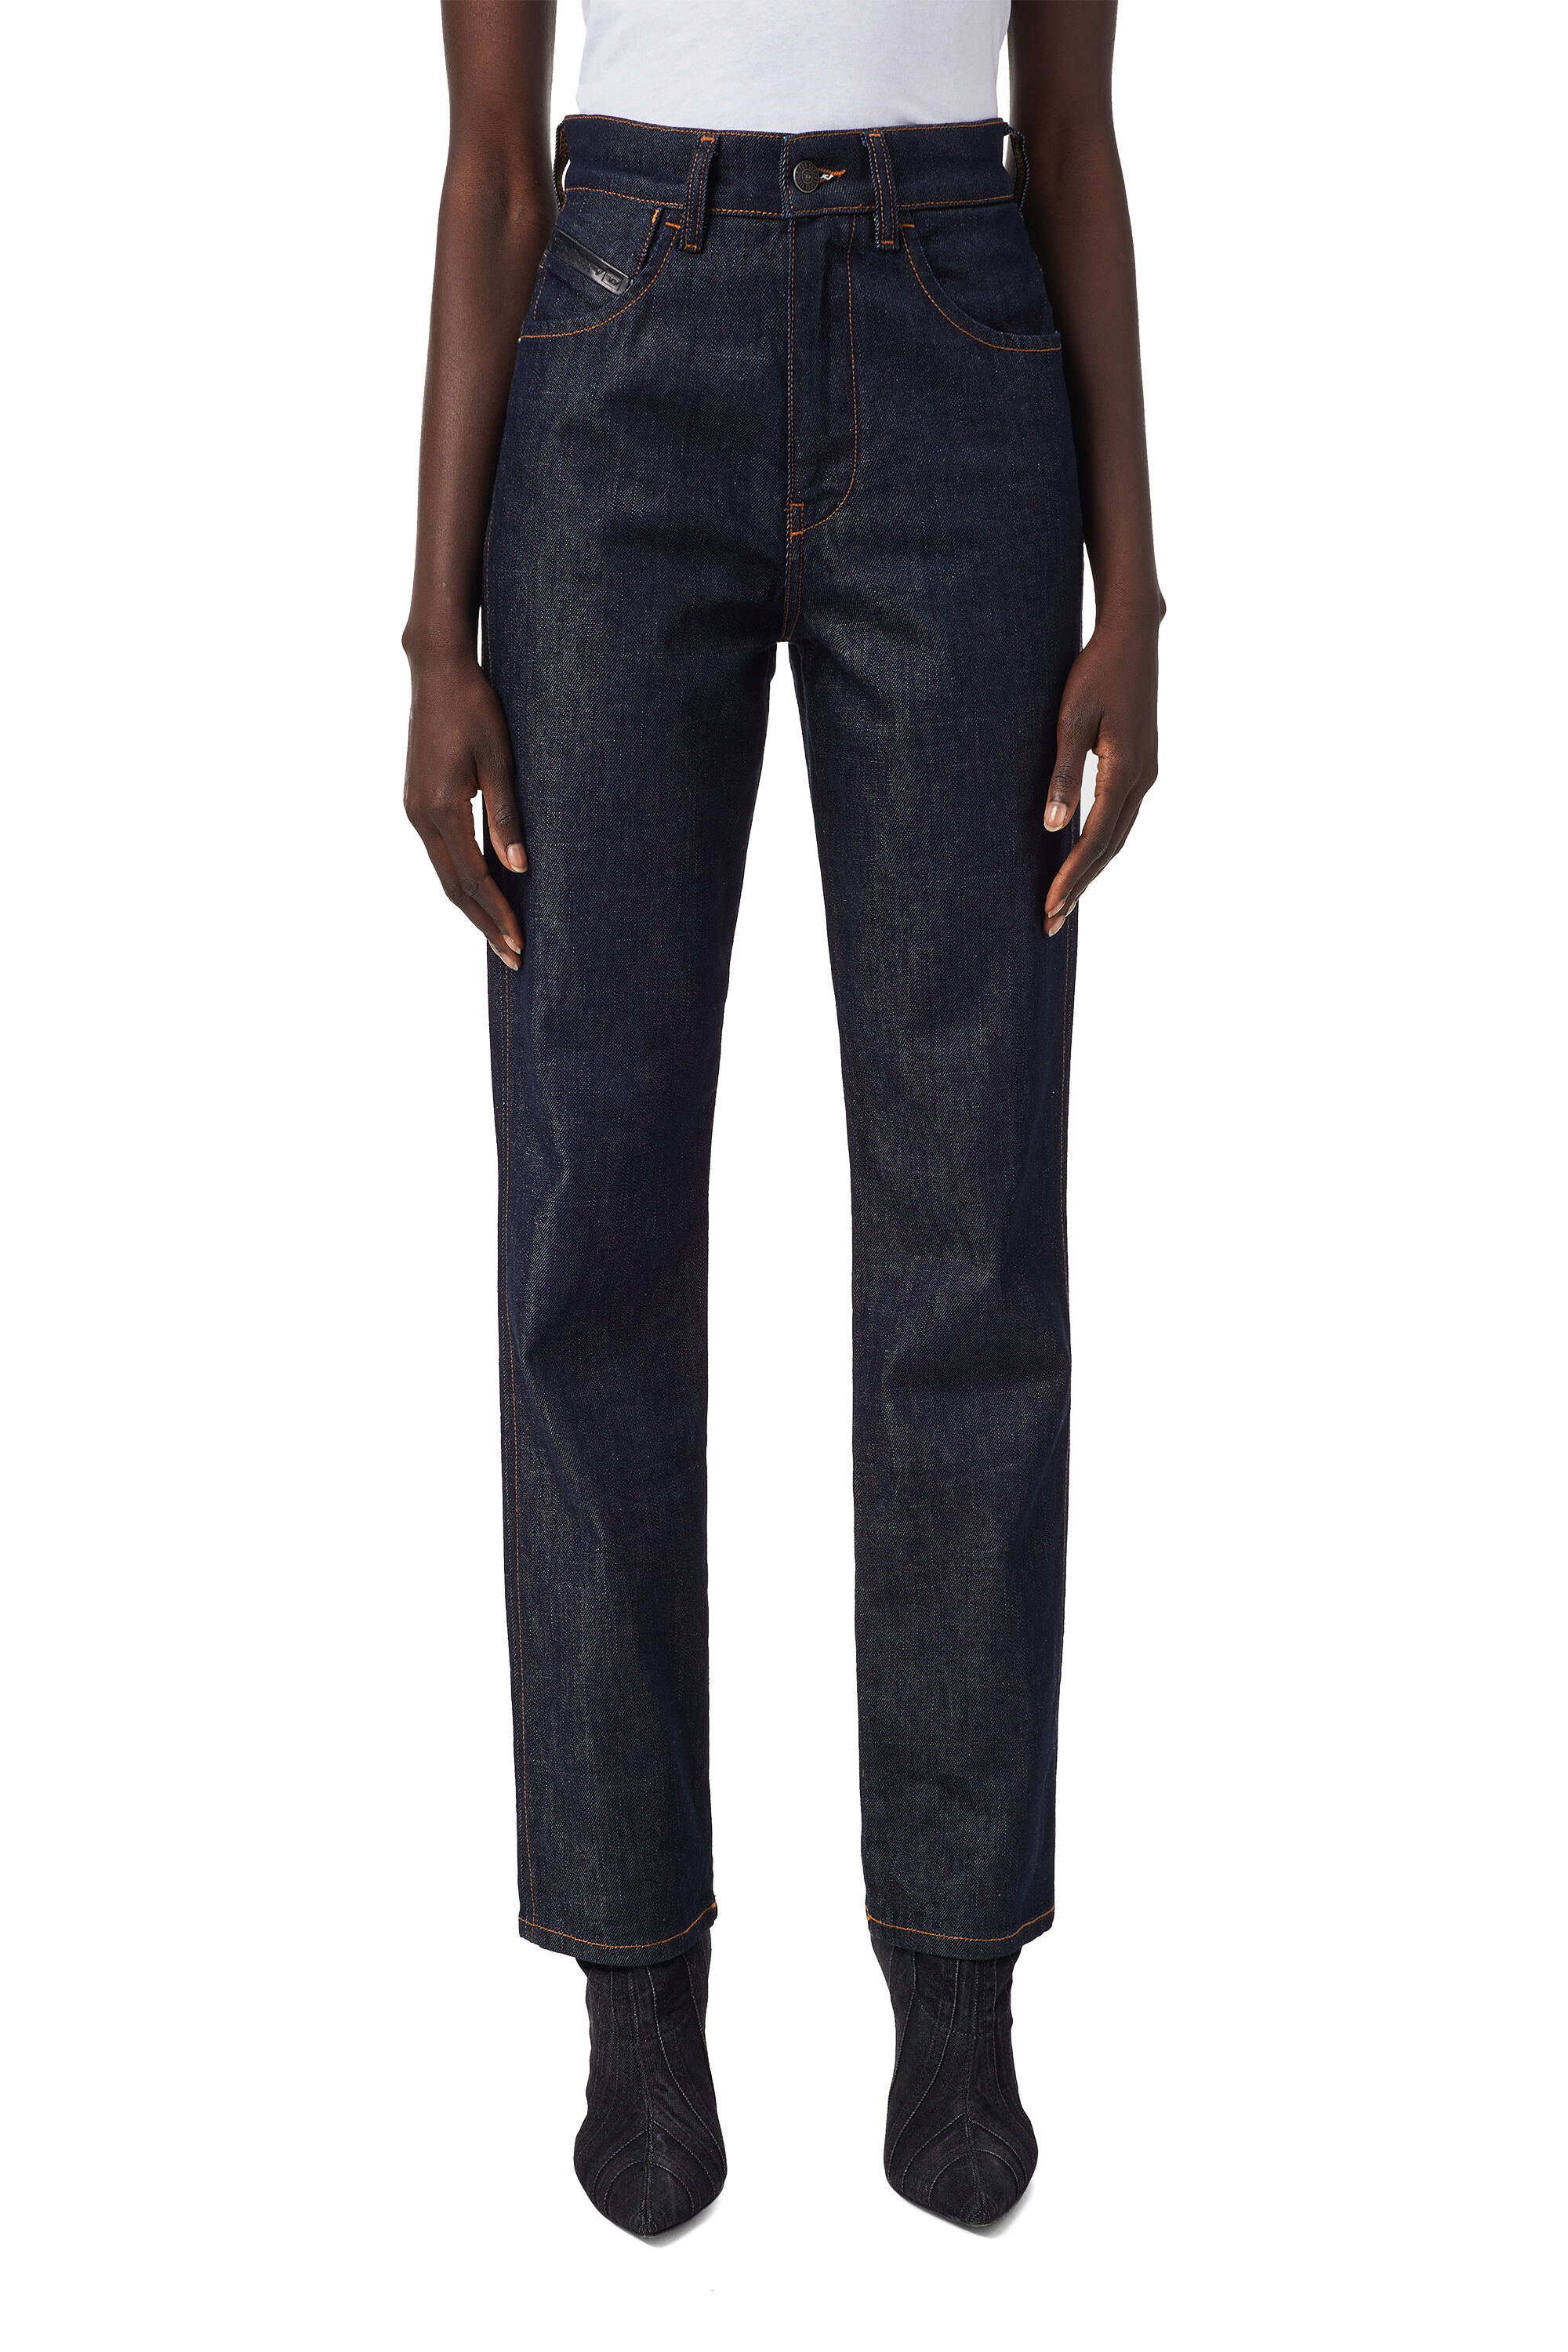 Diesel - D-Arcy 09B39 Straight Jeans,  - Image 3